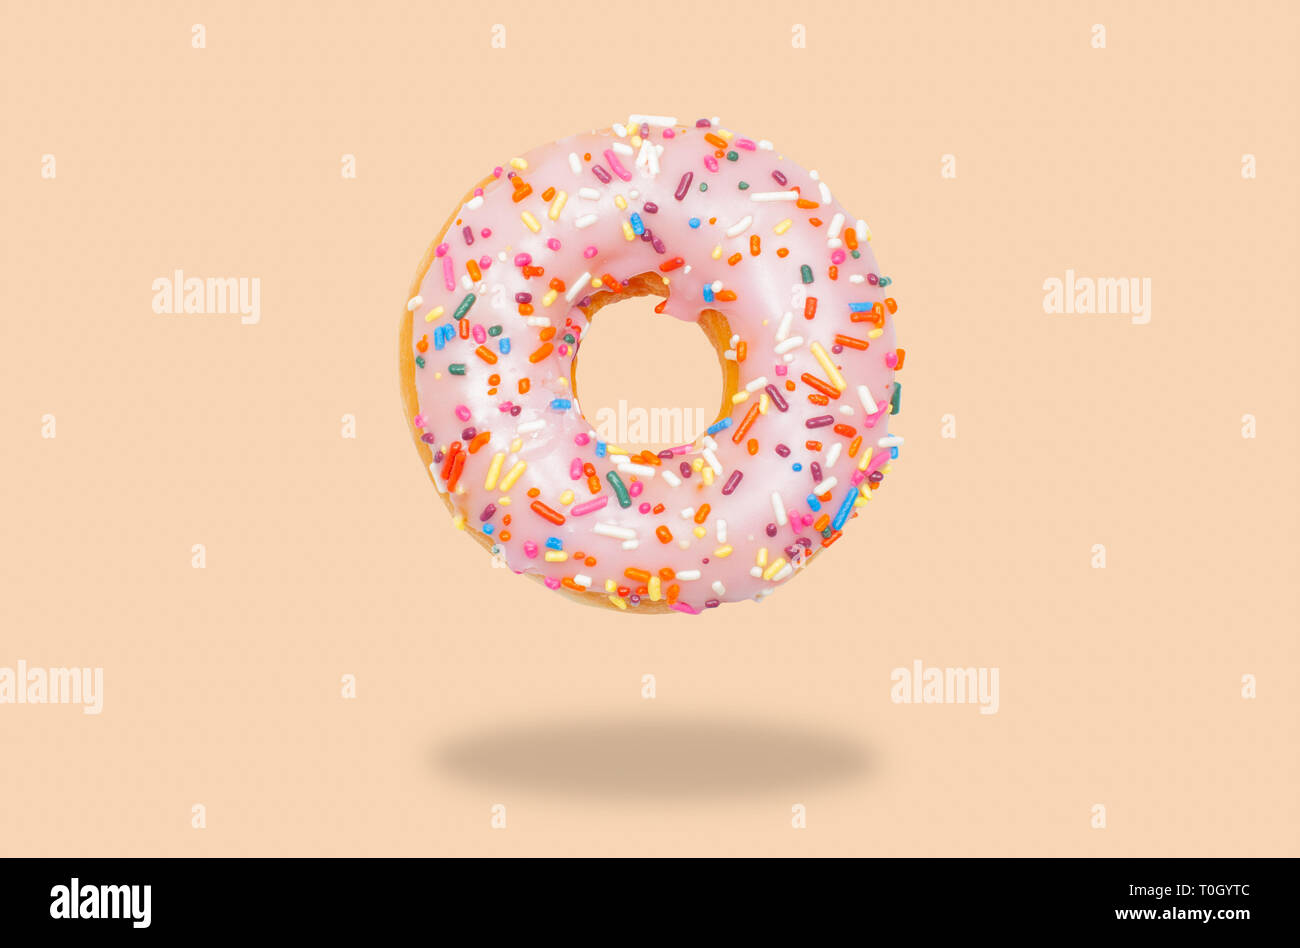 Pink donut with icing on pastel background. Stock Photo